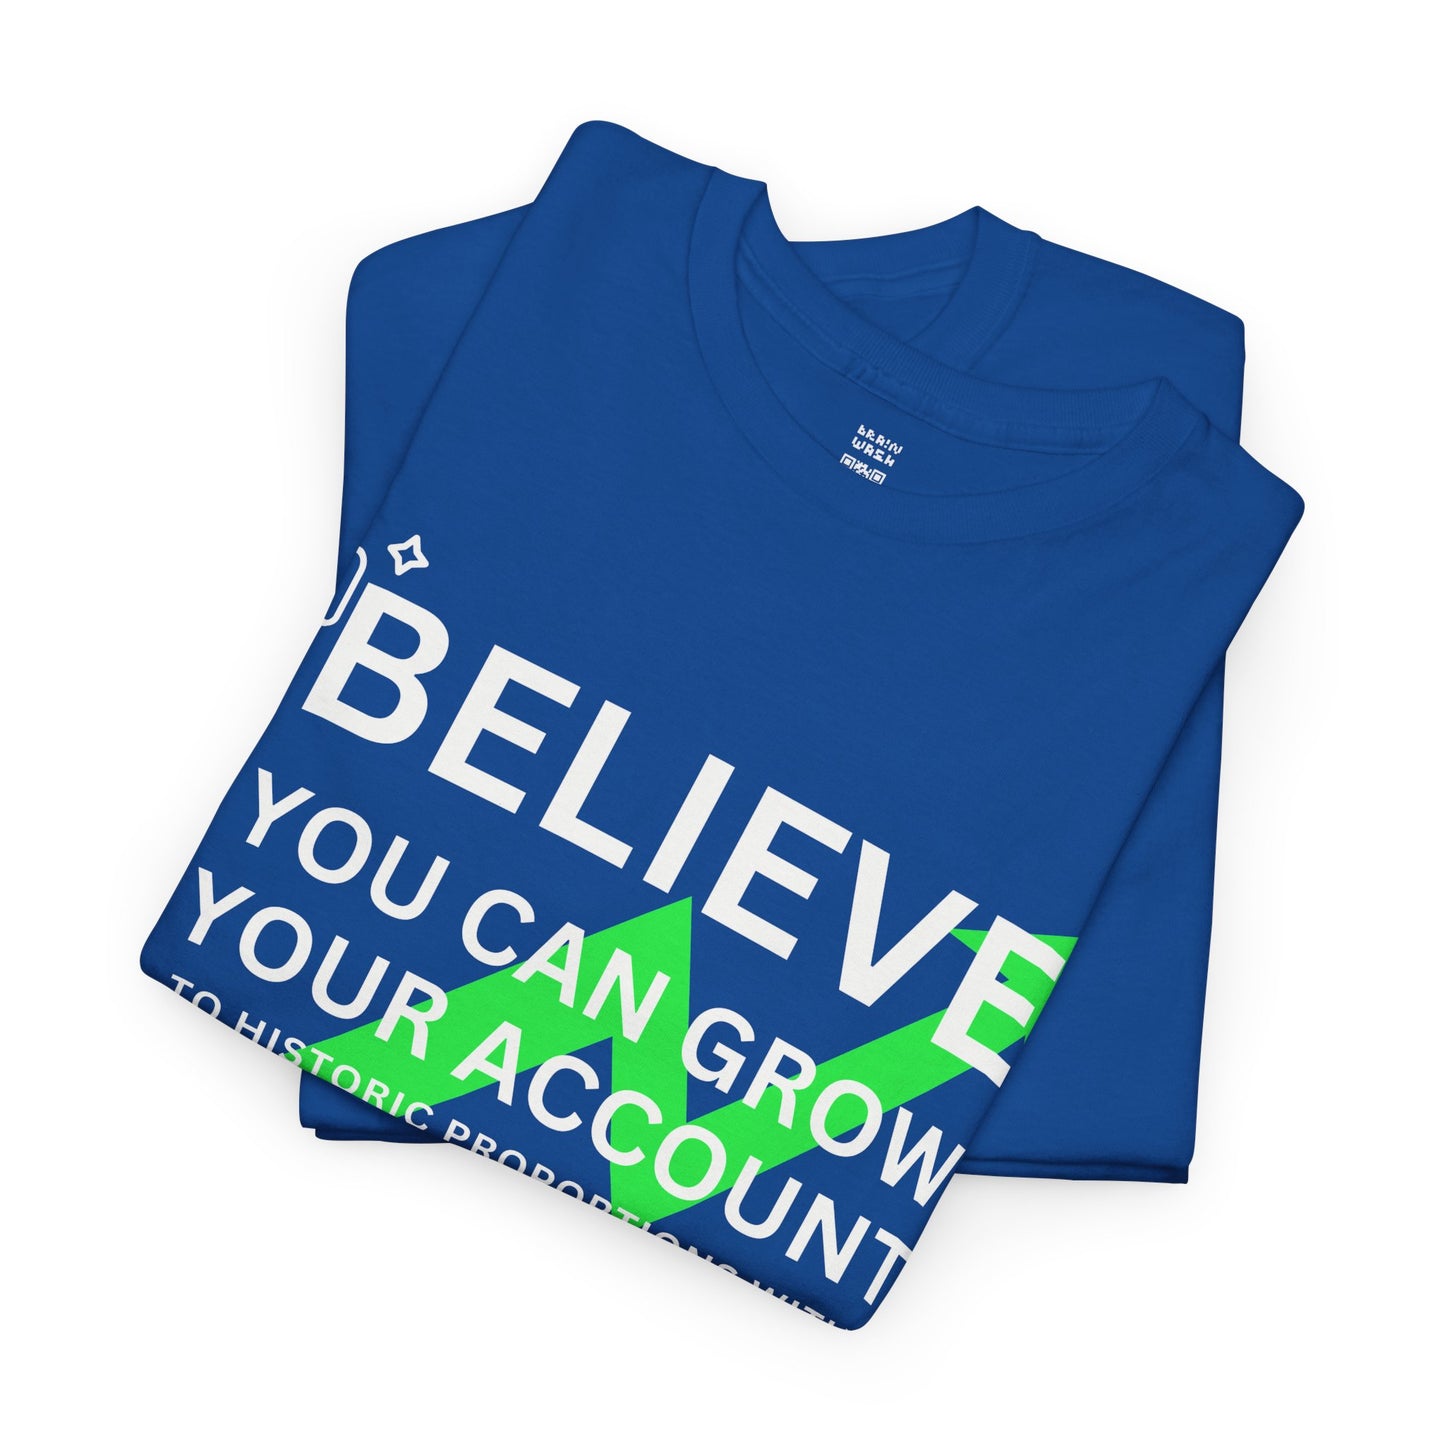 Believe You Can Grow Your Account T-Shirt